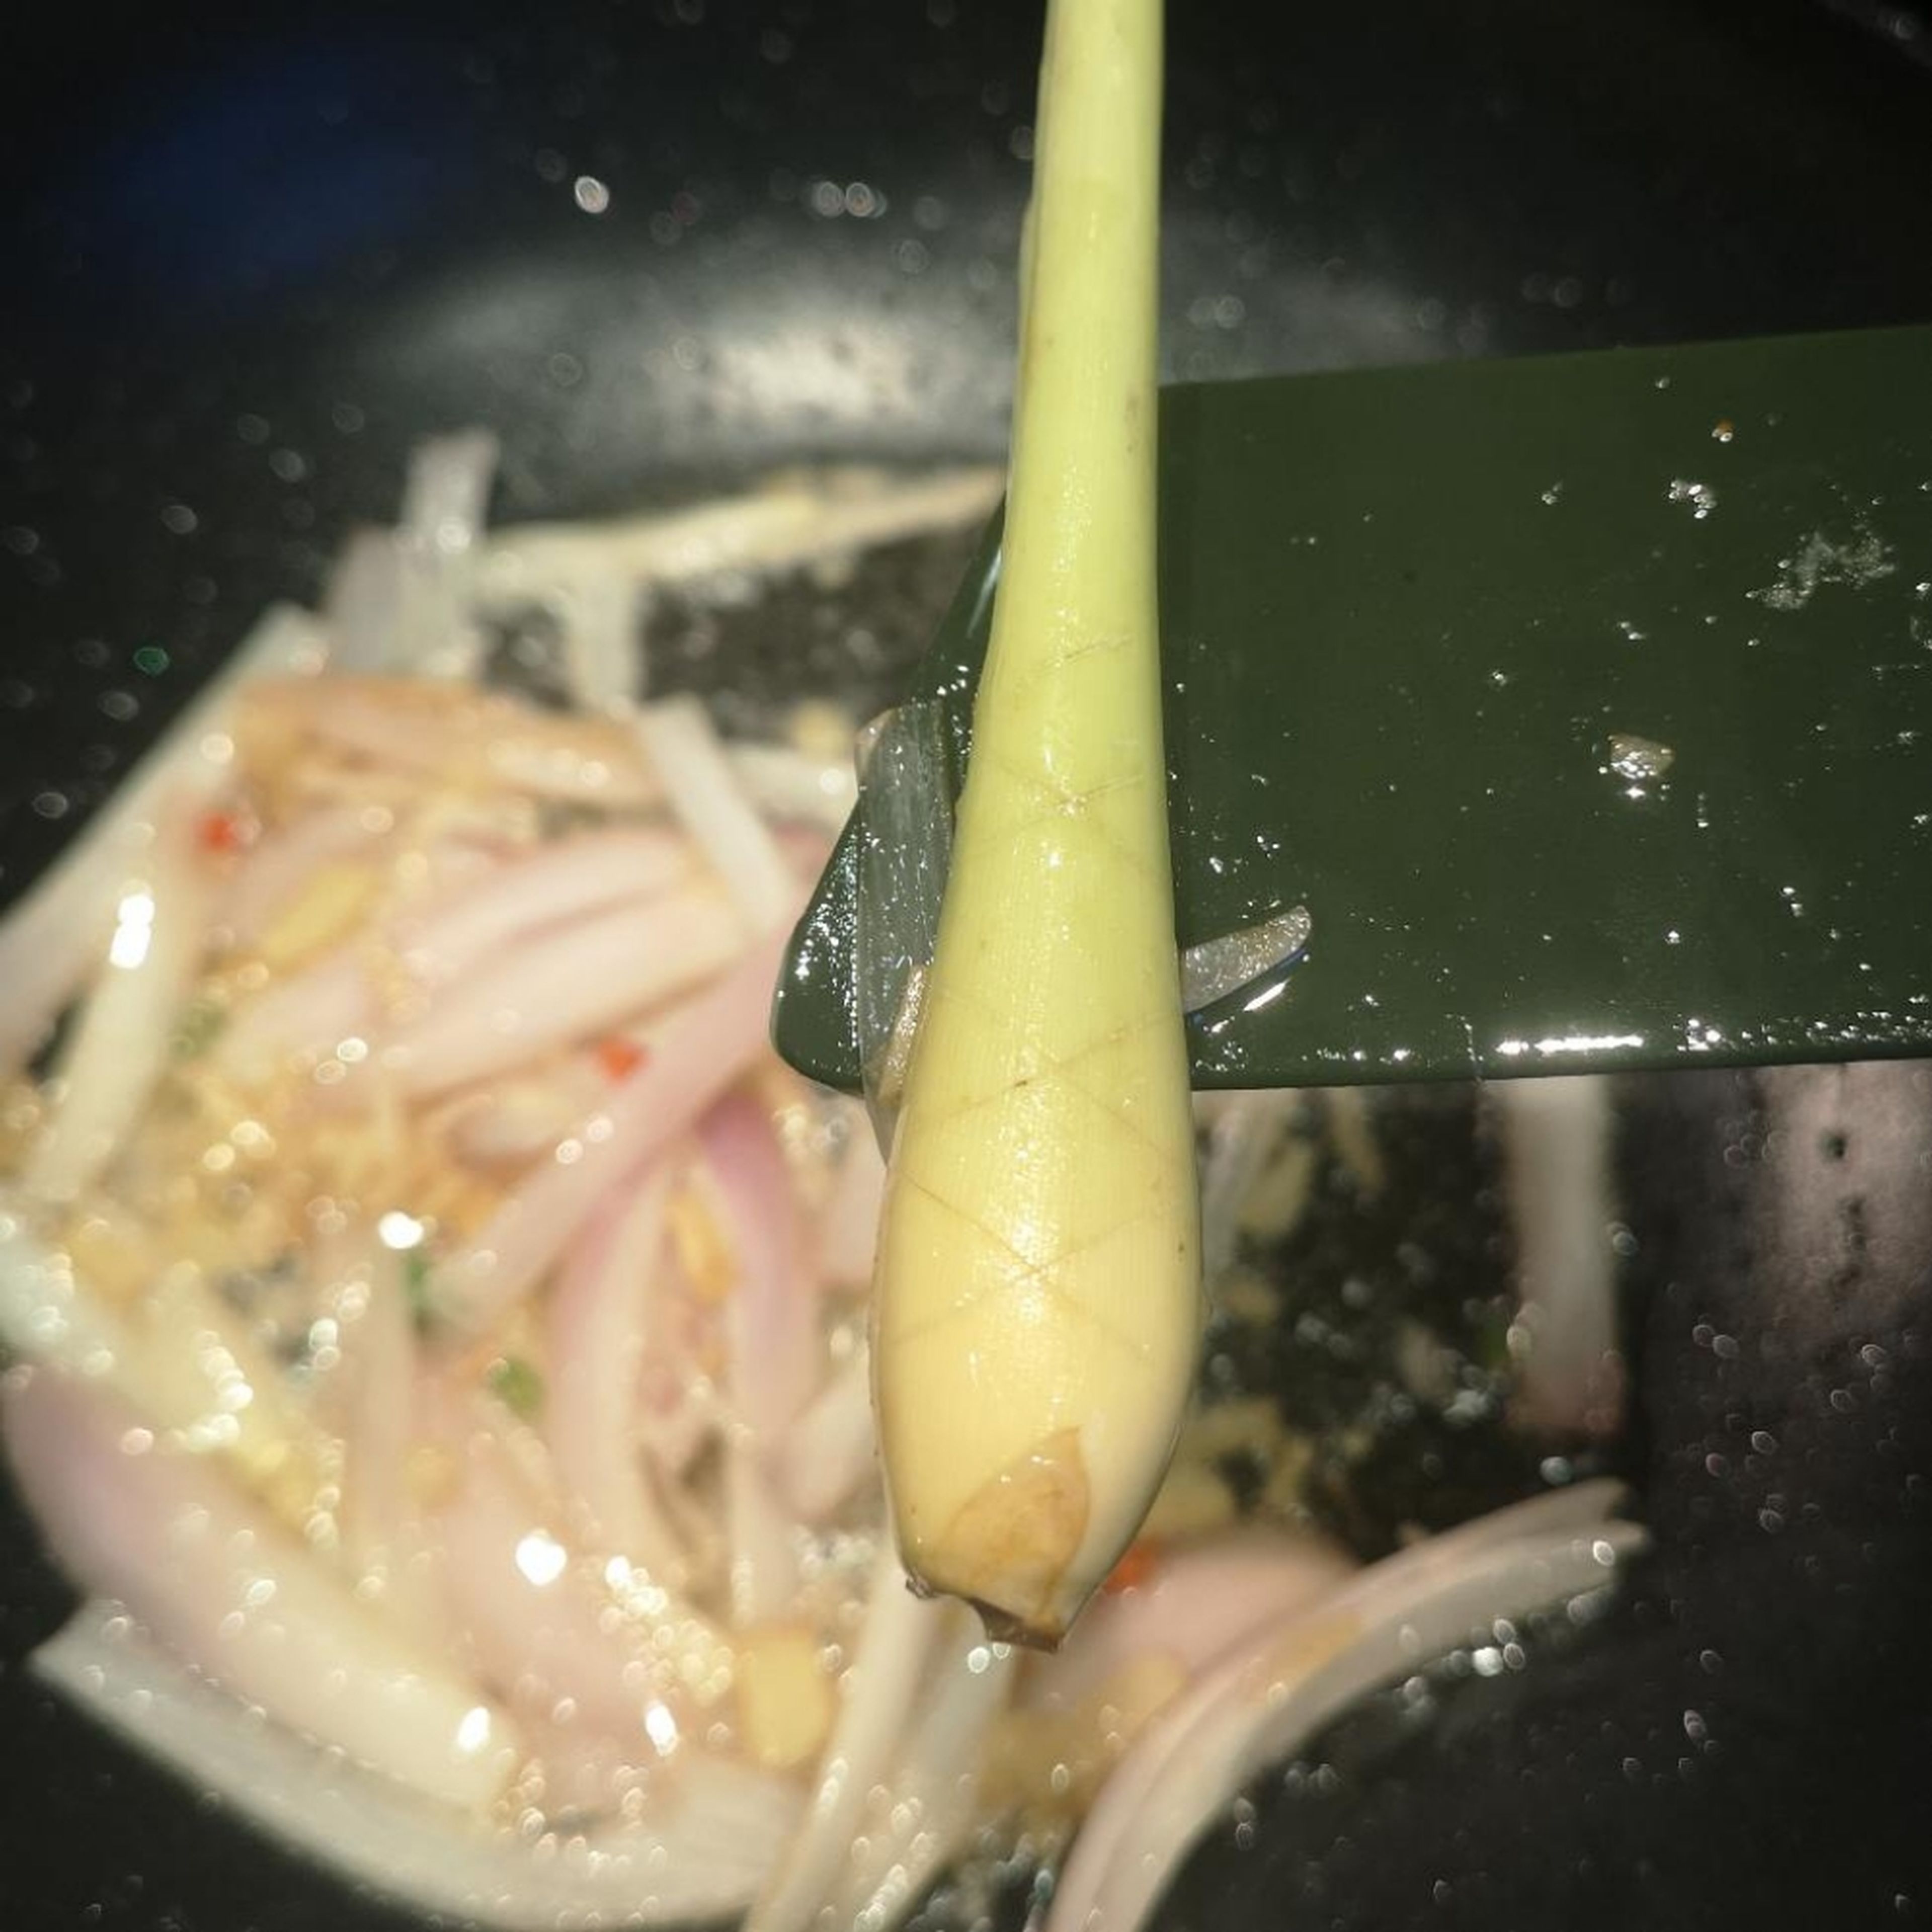 I like to score my lemongrass to get the maximum flavour out, you can cut 'X' shapes onto it without cuting all the way through. don't forget to add your Kafir lime leaf!